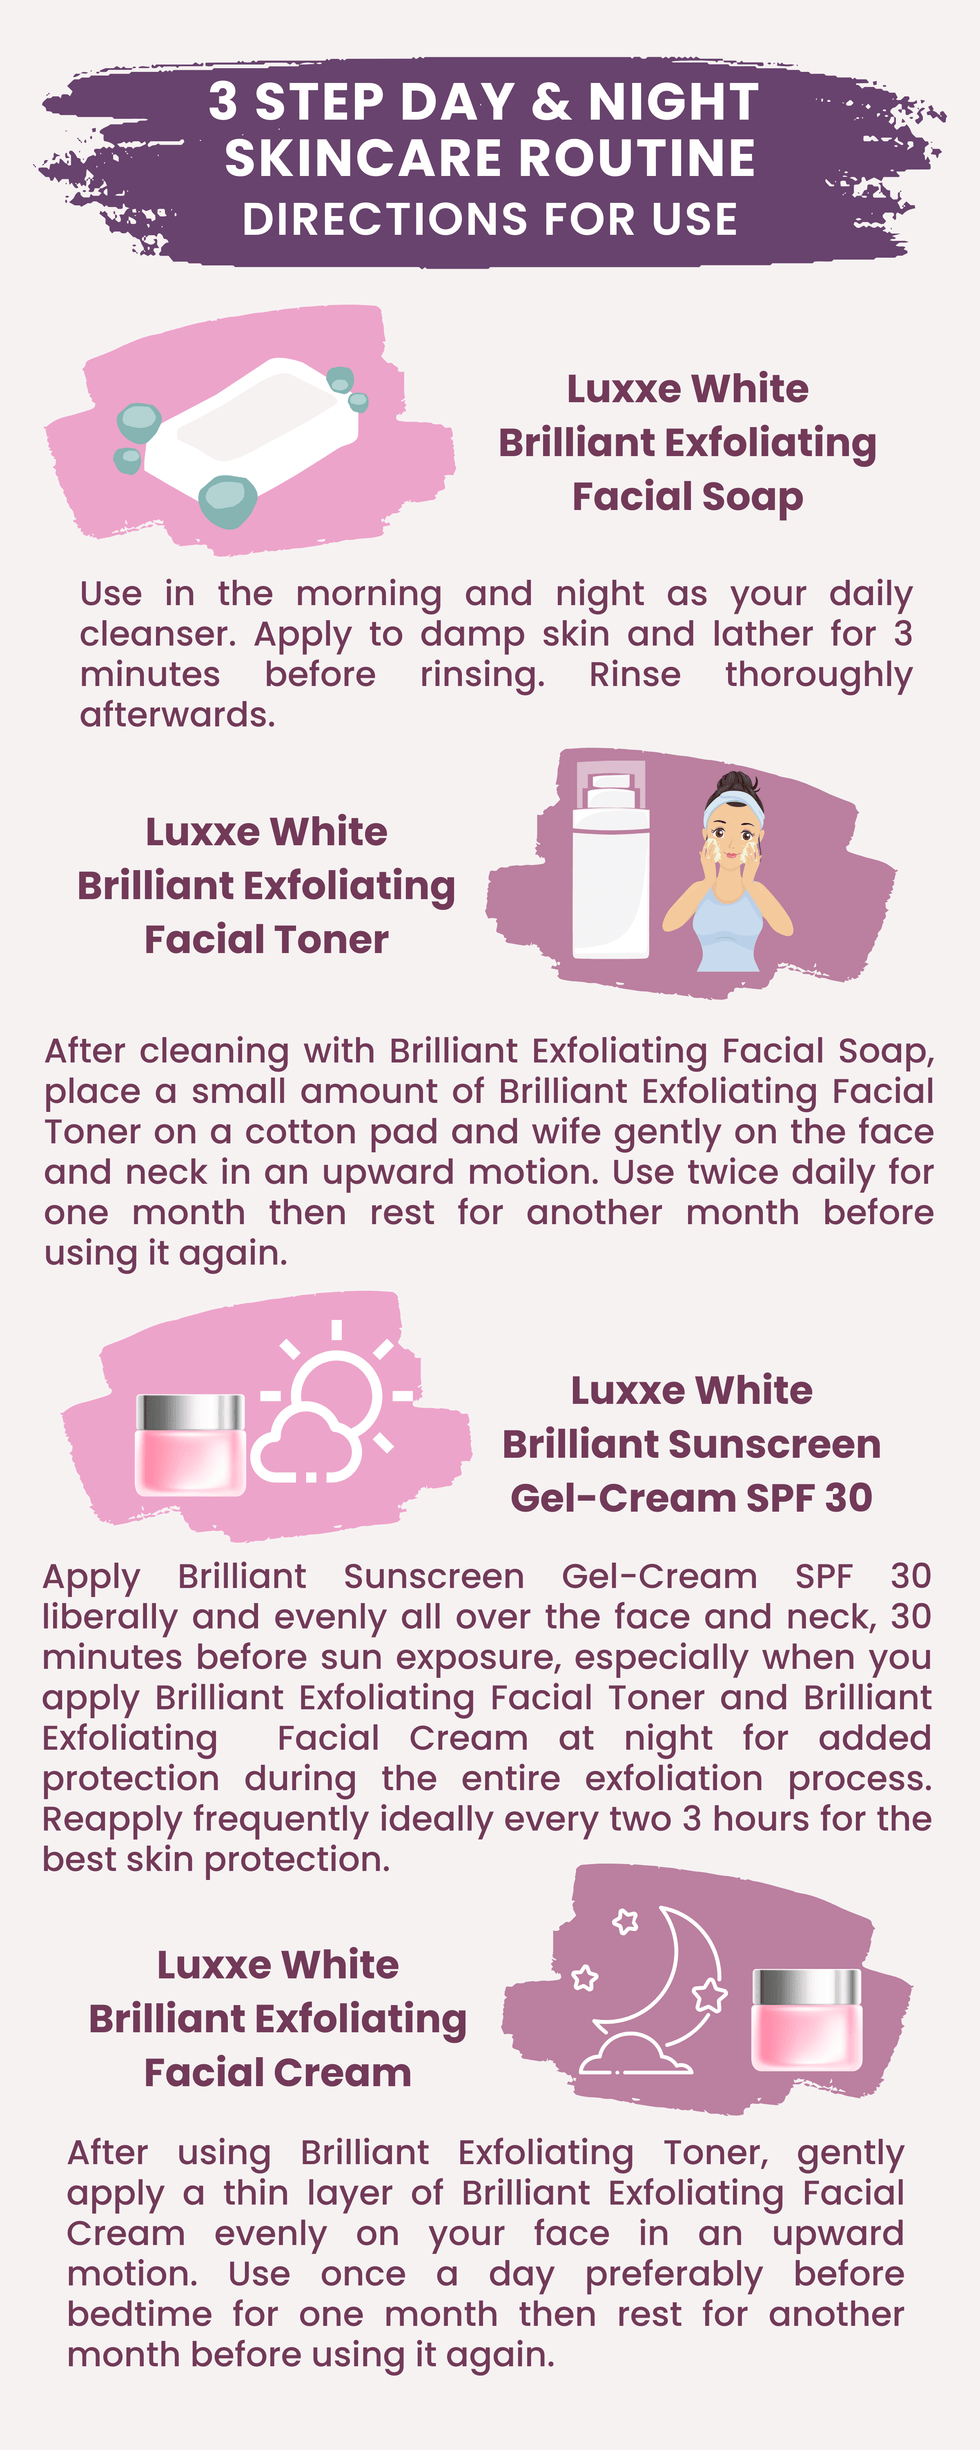 Directions for Use of Frontrow Luxxe White Brilliant Exfoliating Facial Set